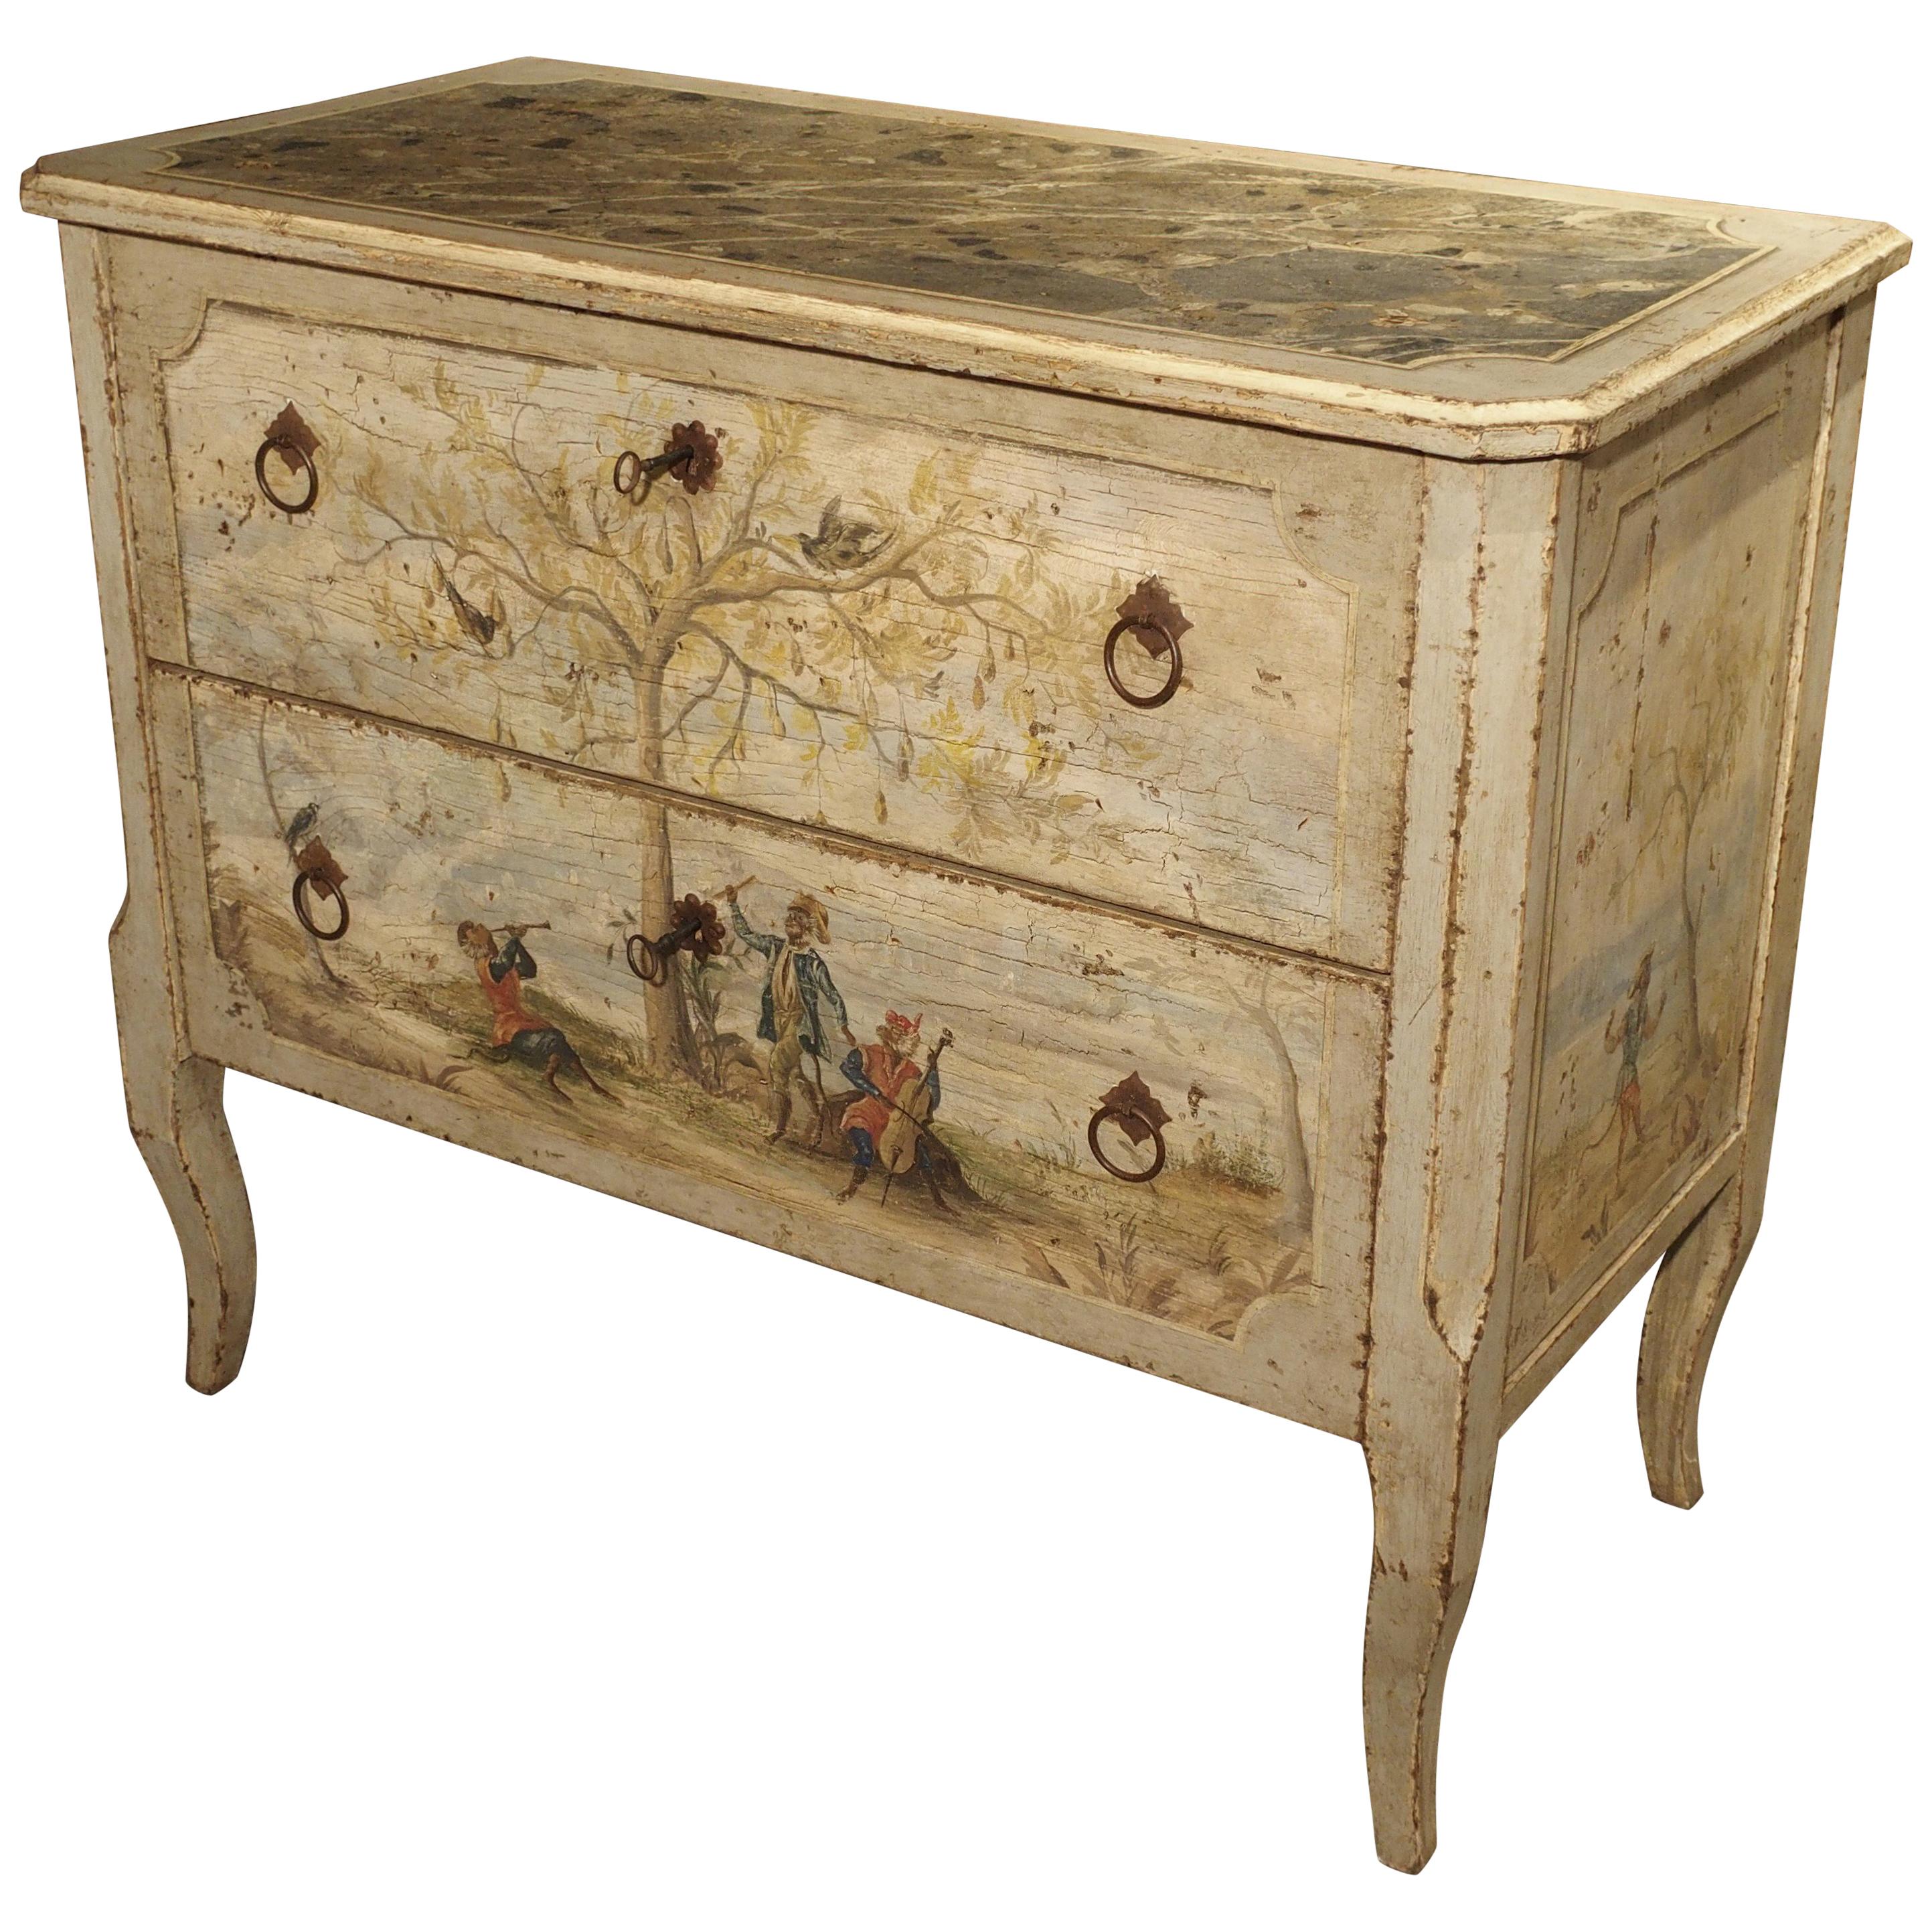 Antique Painted Commode from Italy, 19th Century